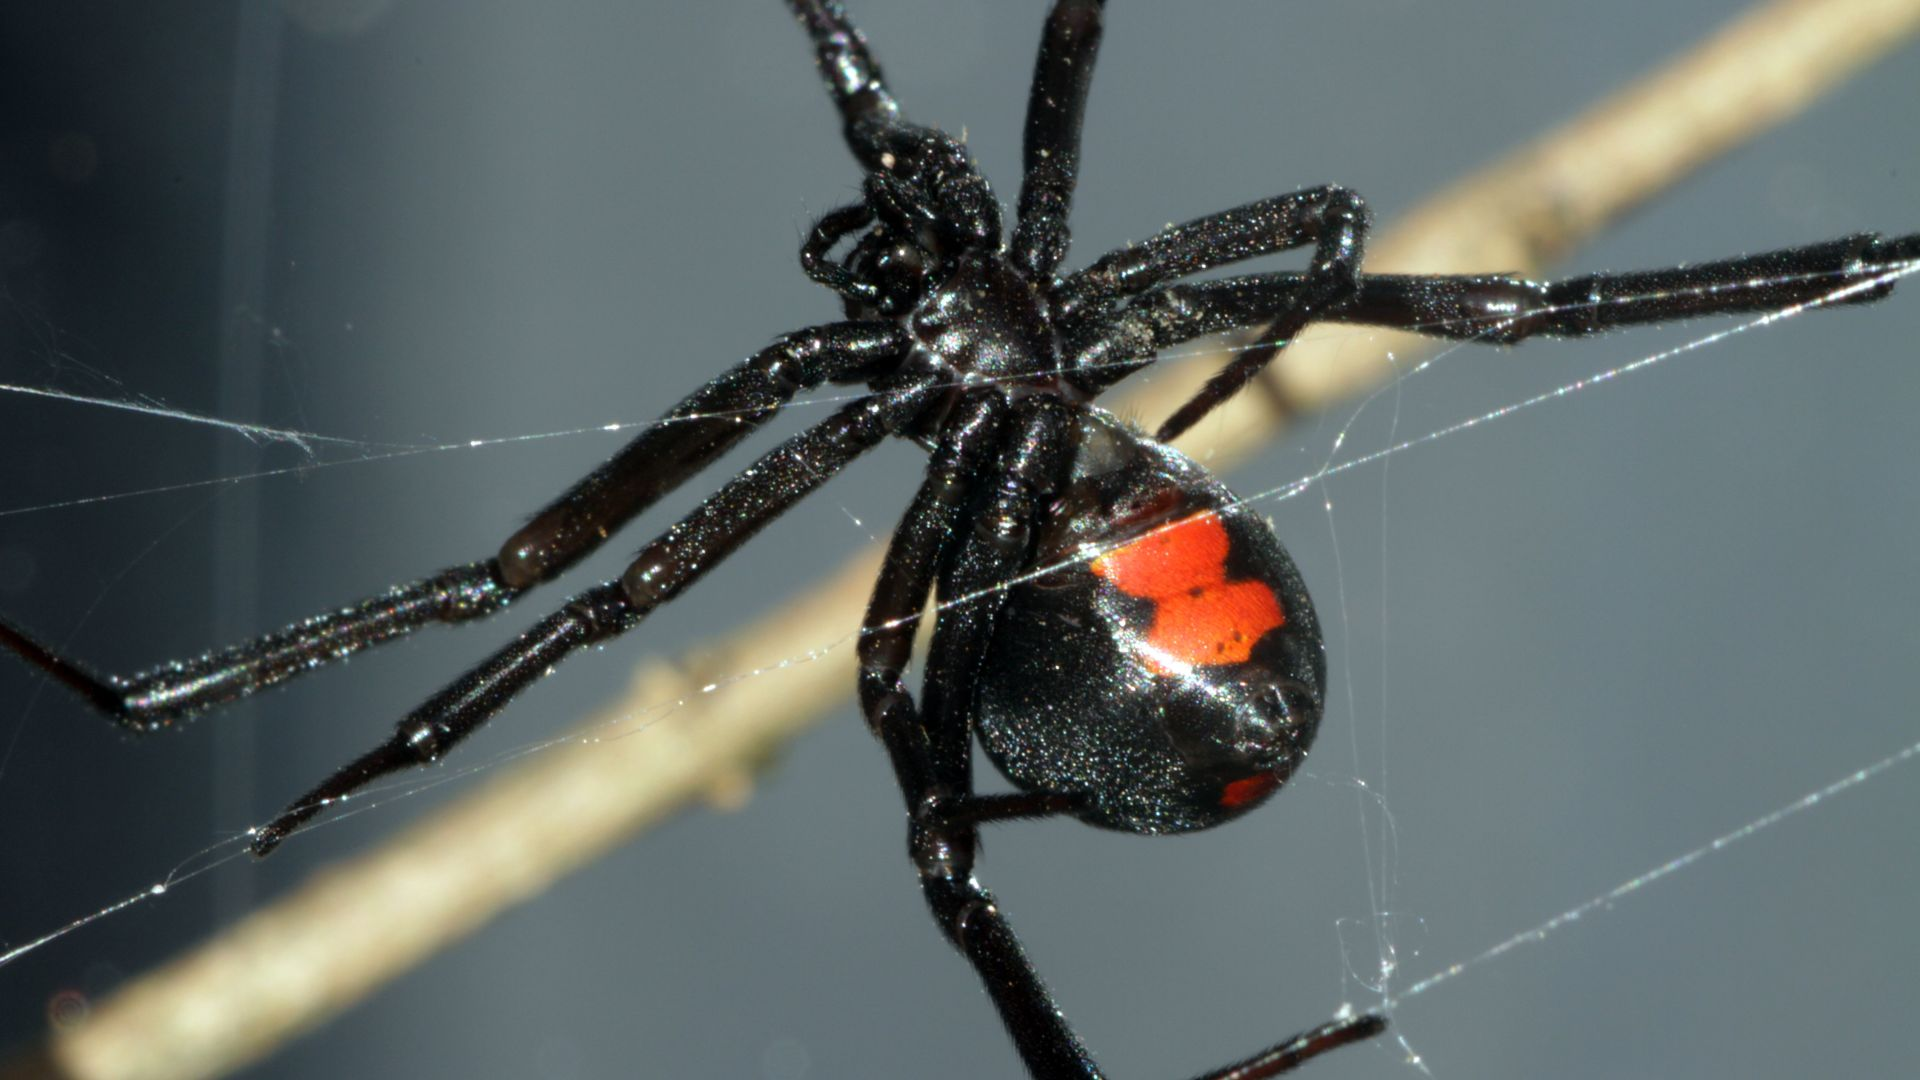 An up-close image of a Black Widow spider.